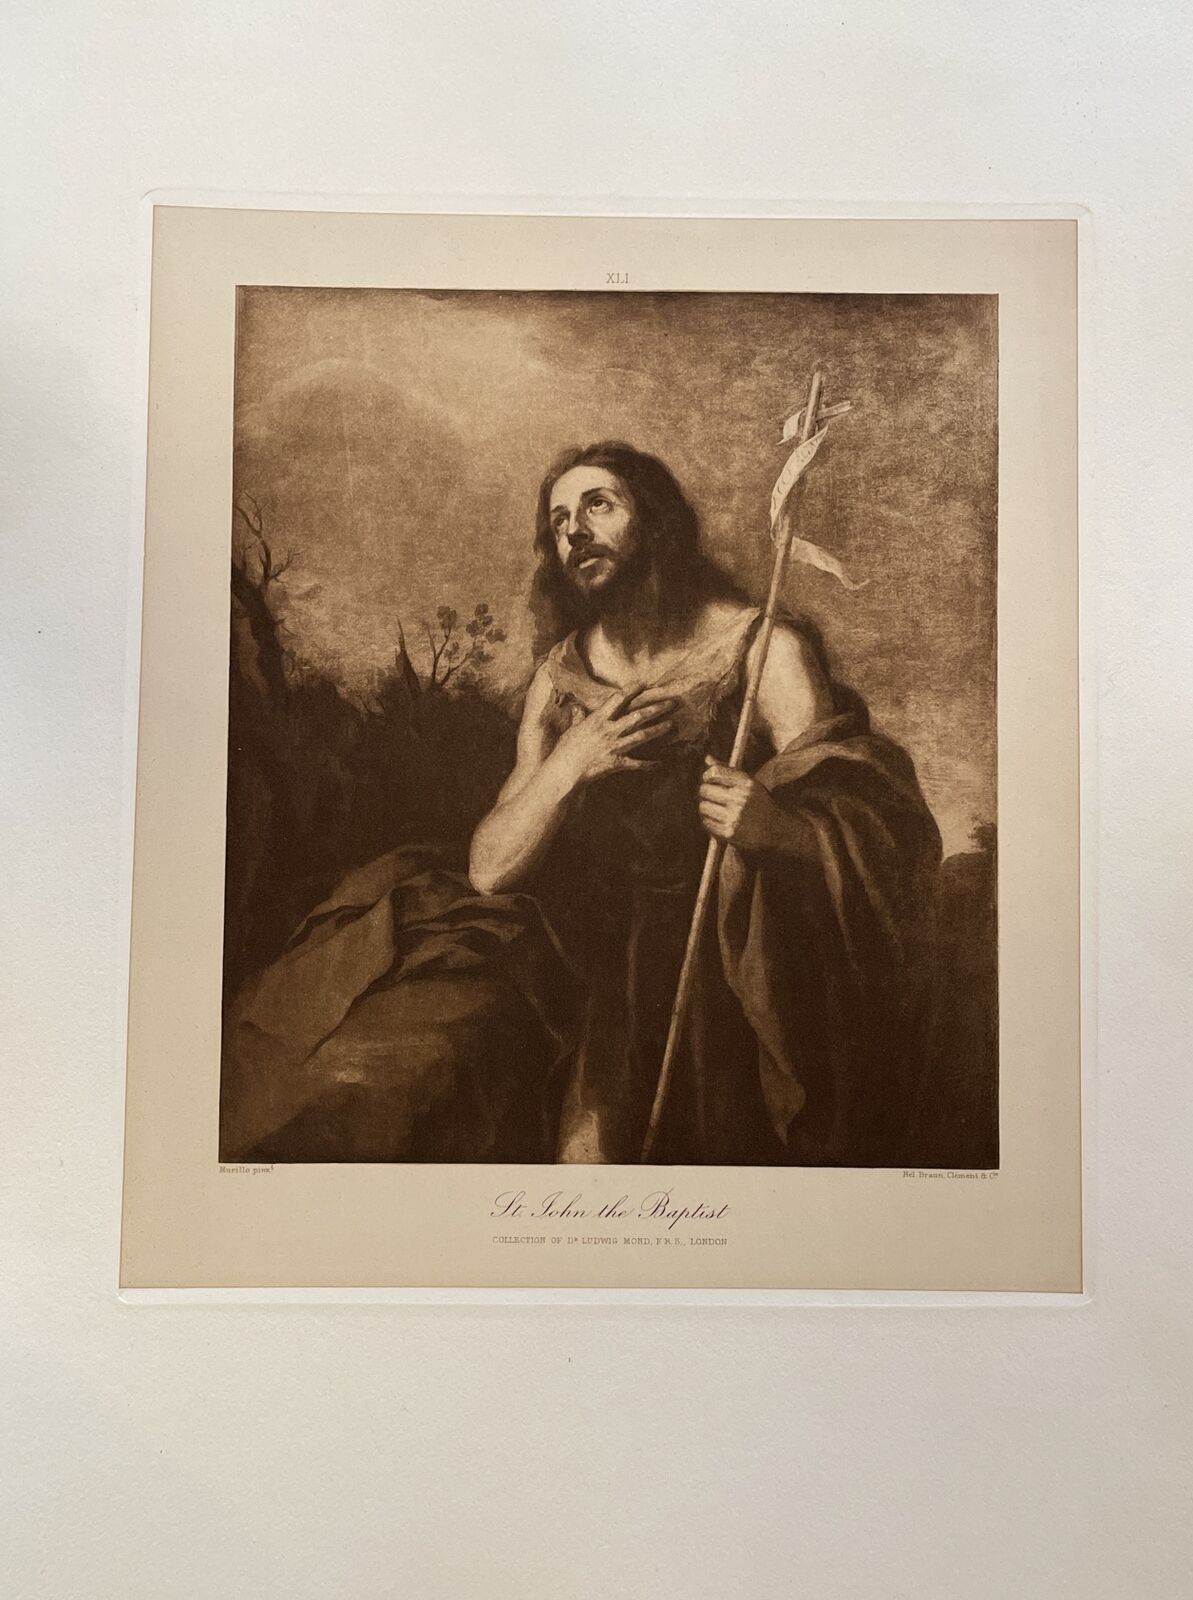 Large Antique Religious Art Print Ludwig Mond Collection St John the Baptist